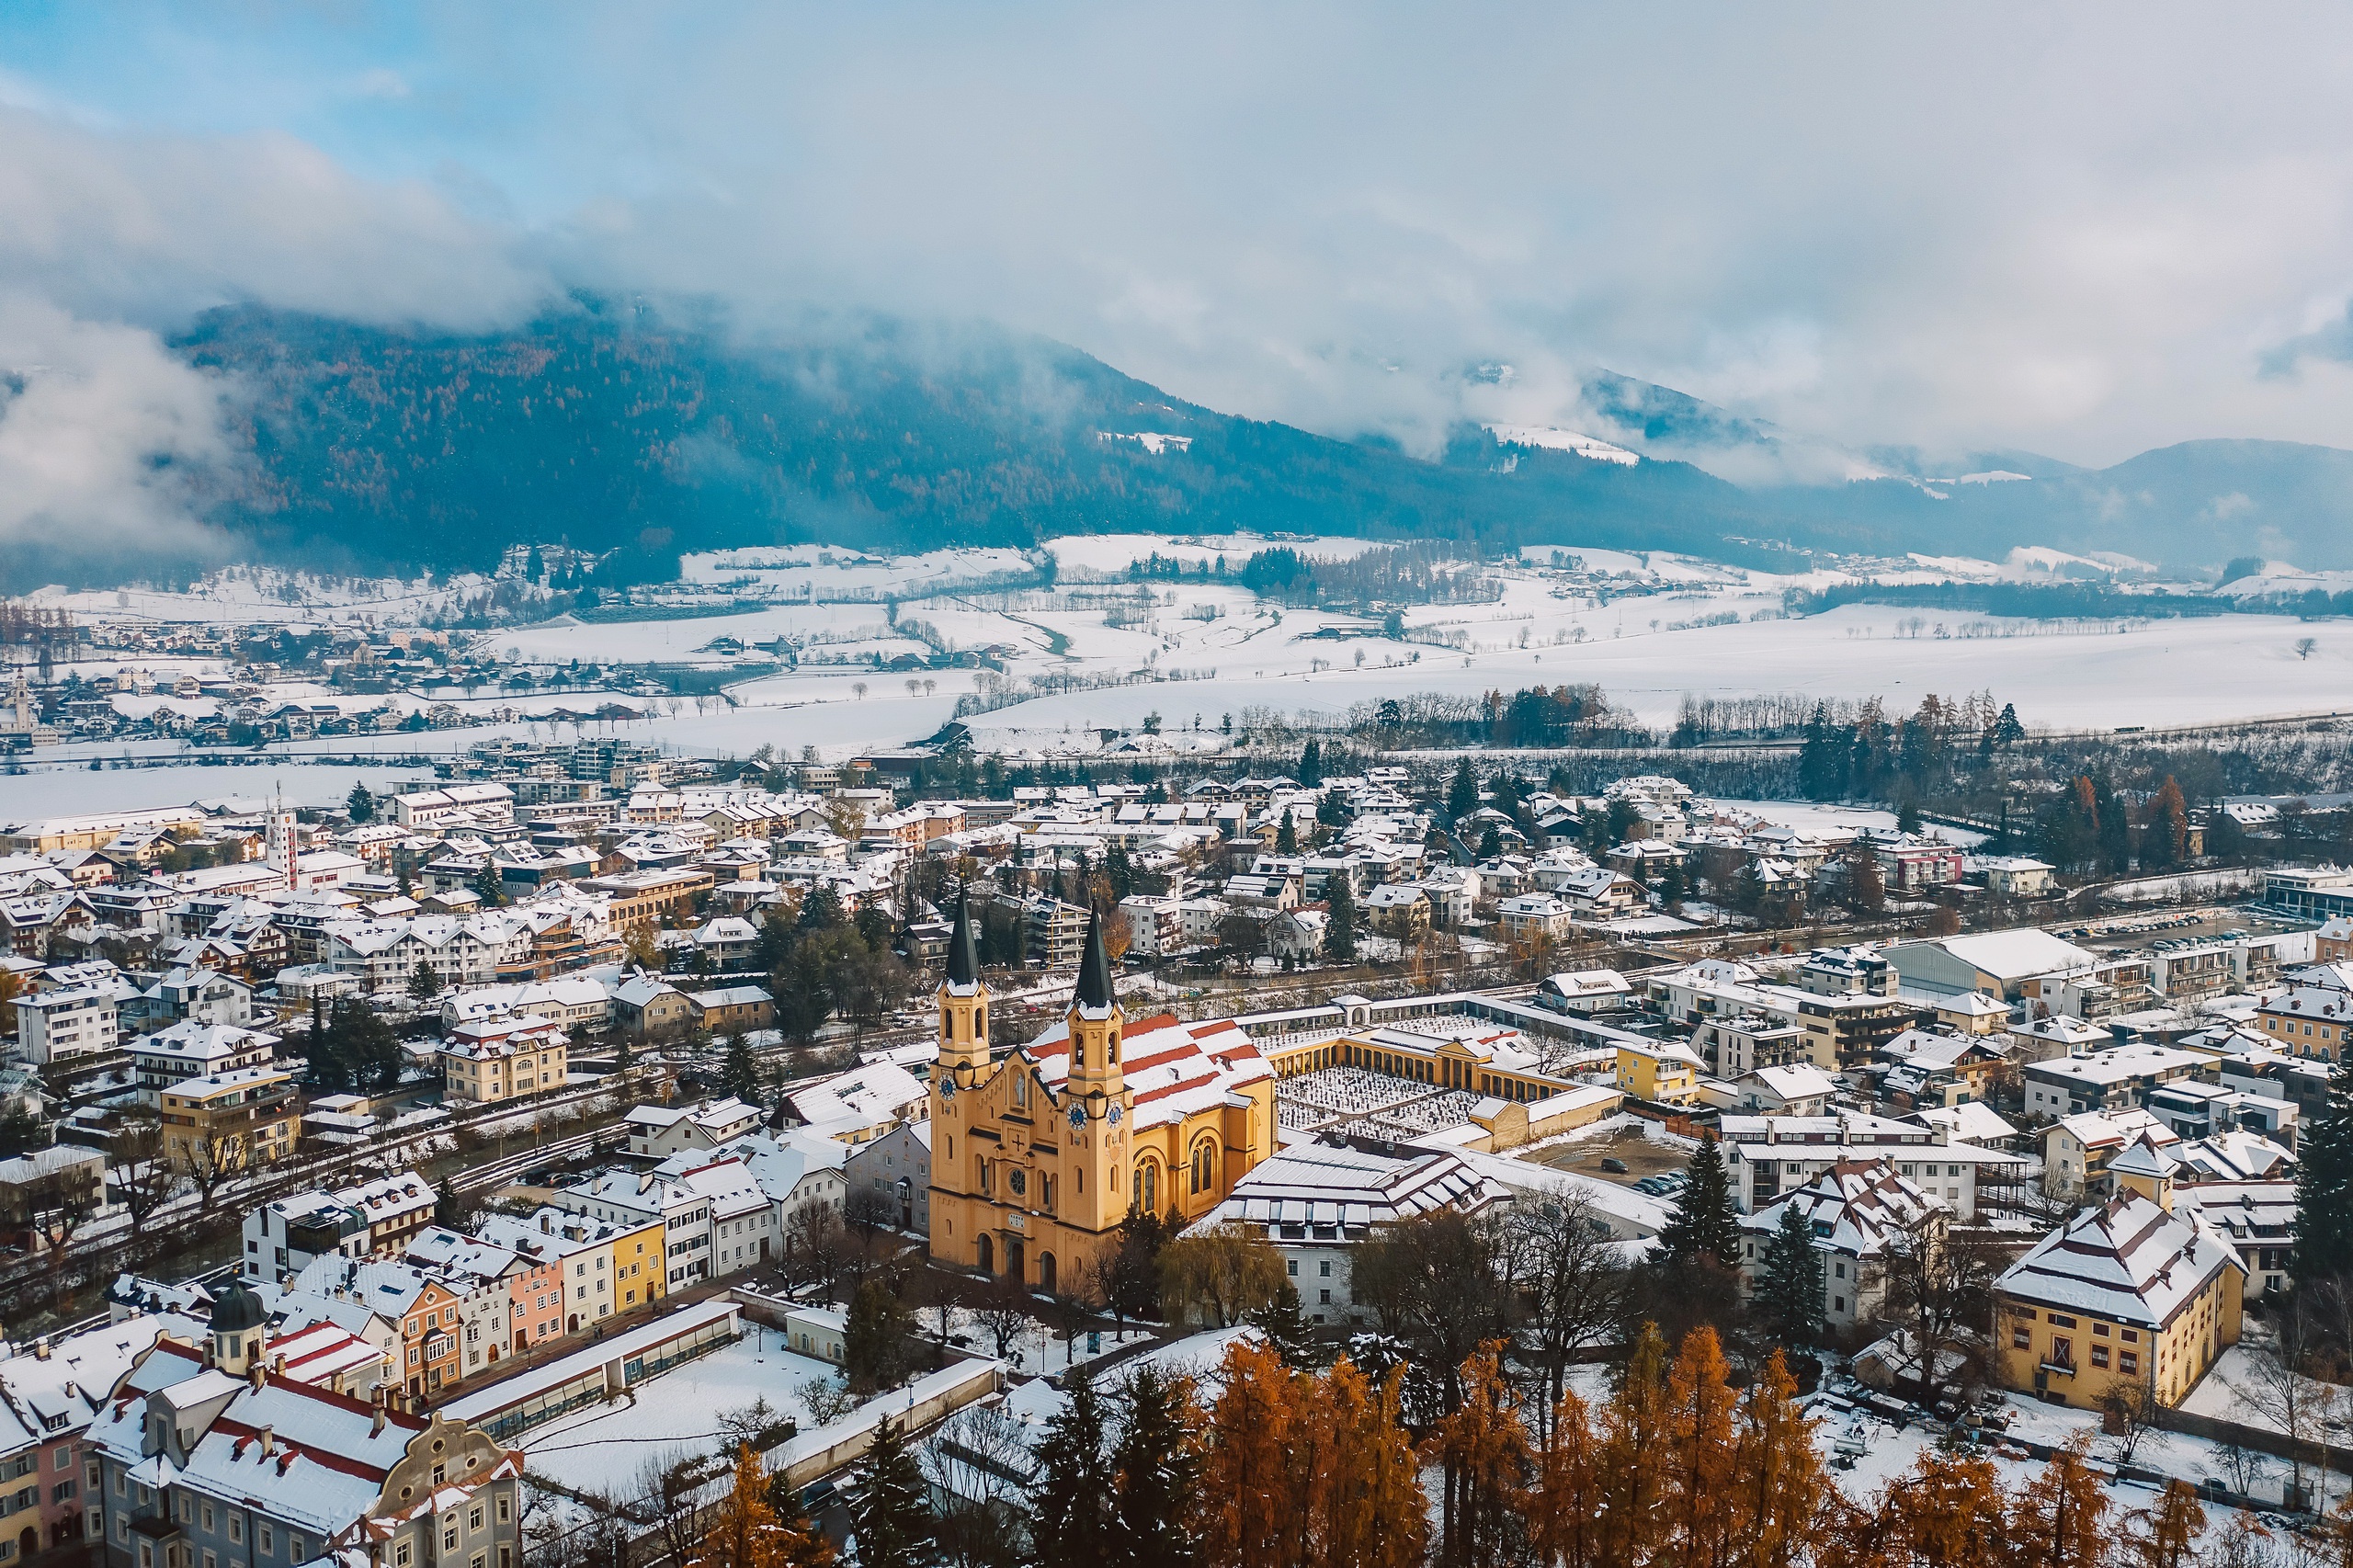 General 2560x1706 winter Italy South Tyrol Trentino aerial view cityscape church snow